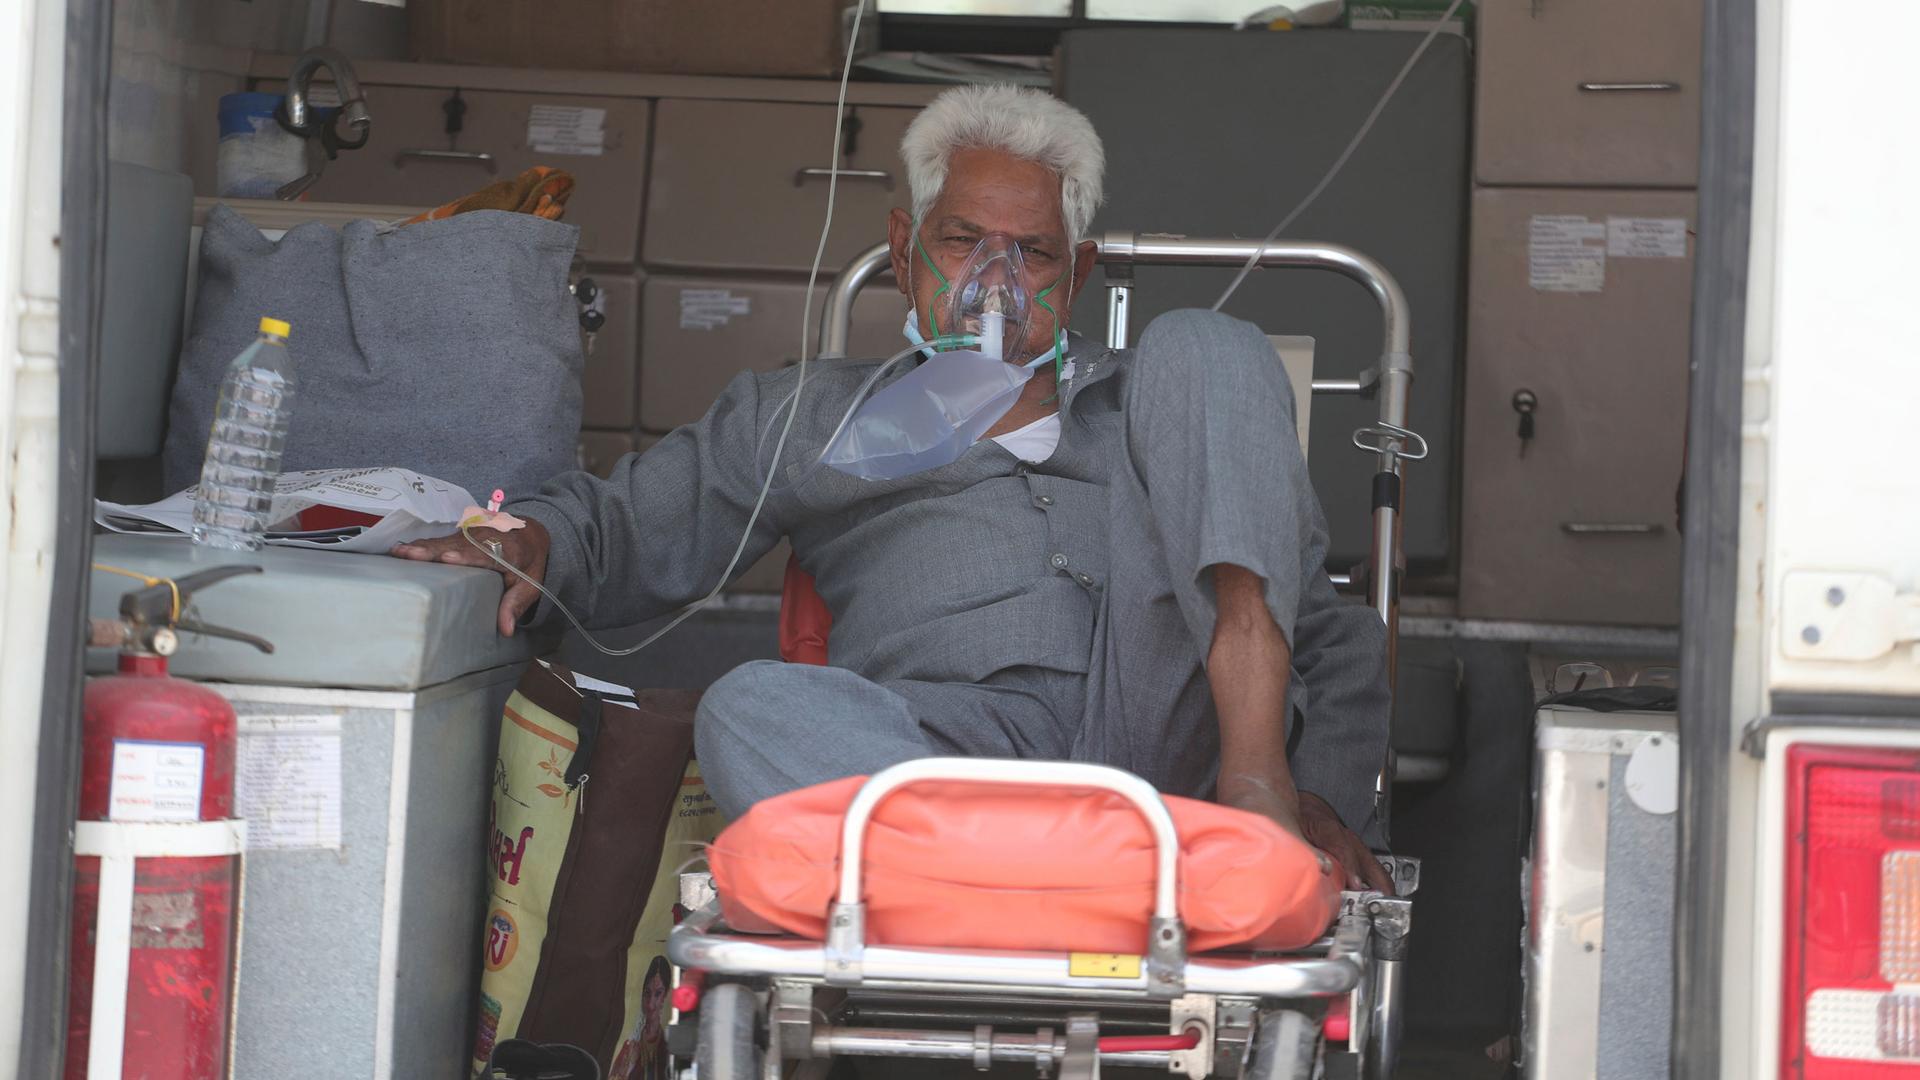 An older man is shown sitting on a gurney with a face mask on supplying oxygen.